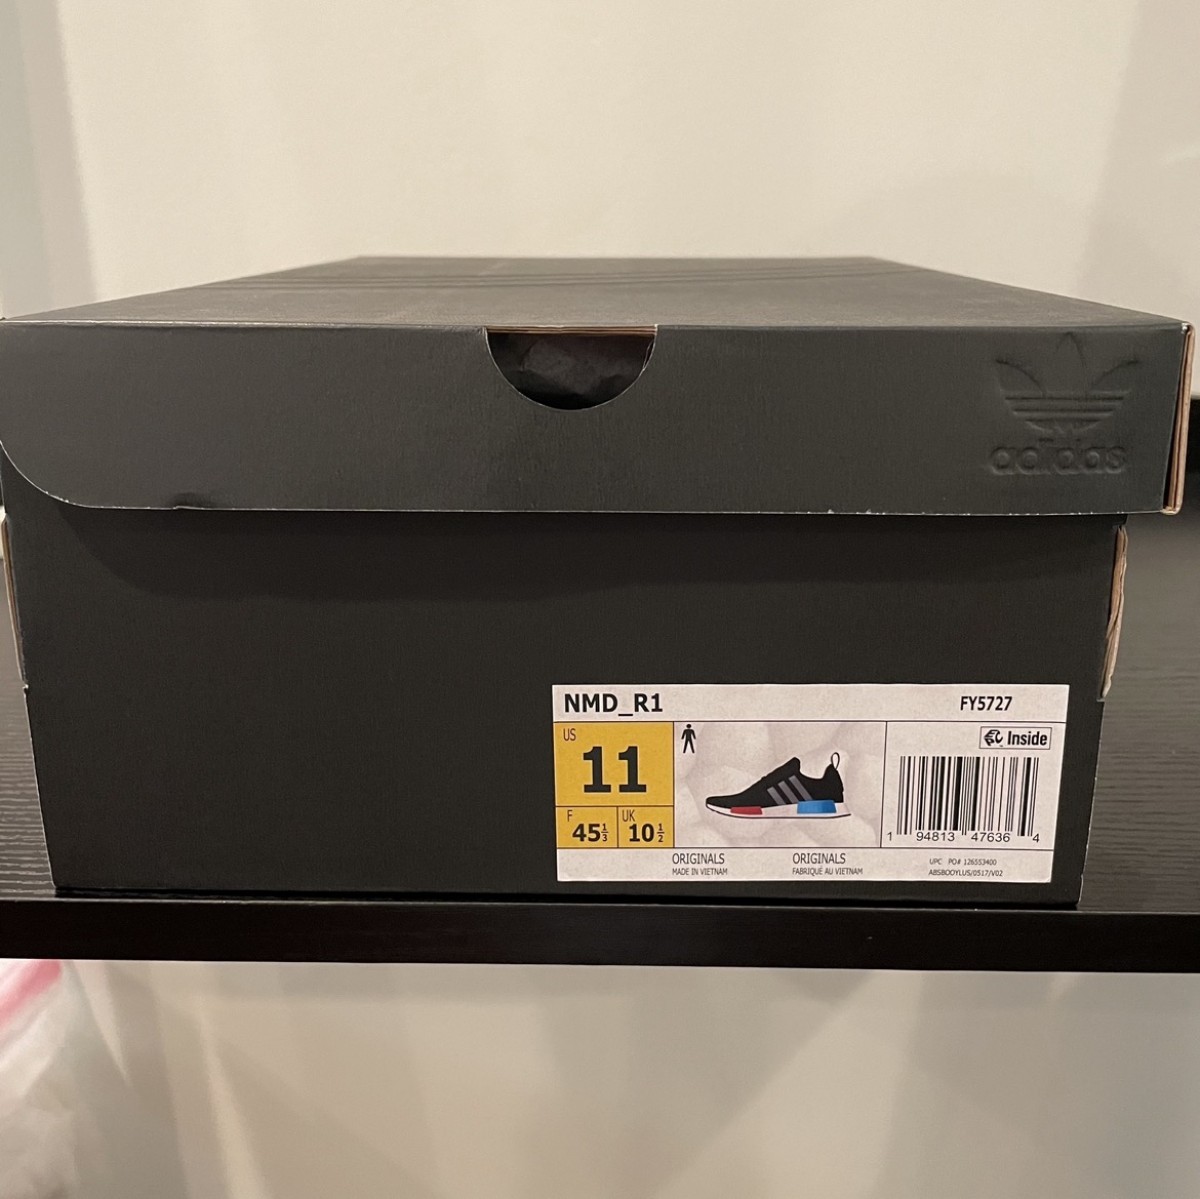 NMD R1 size 11 - 2